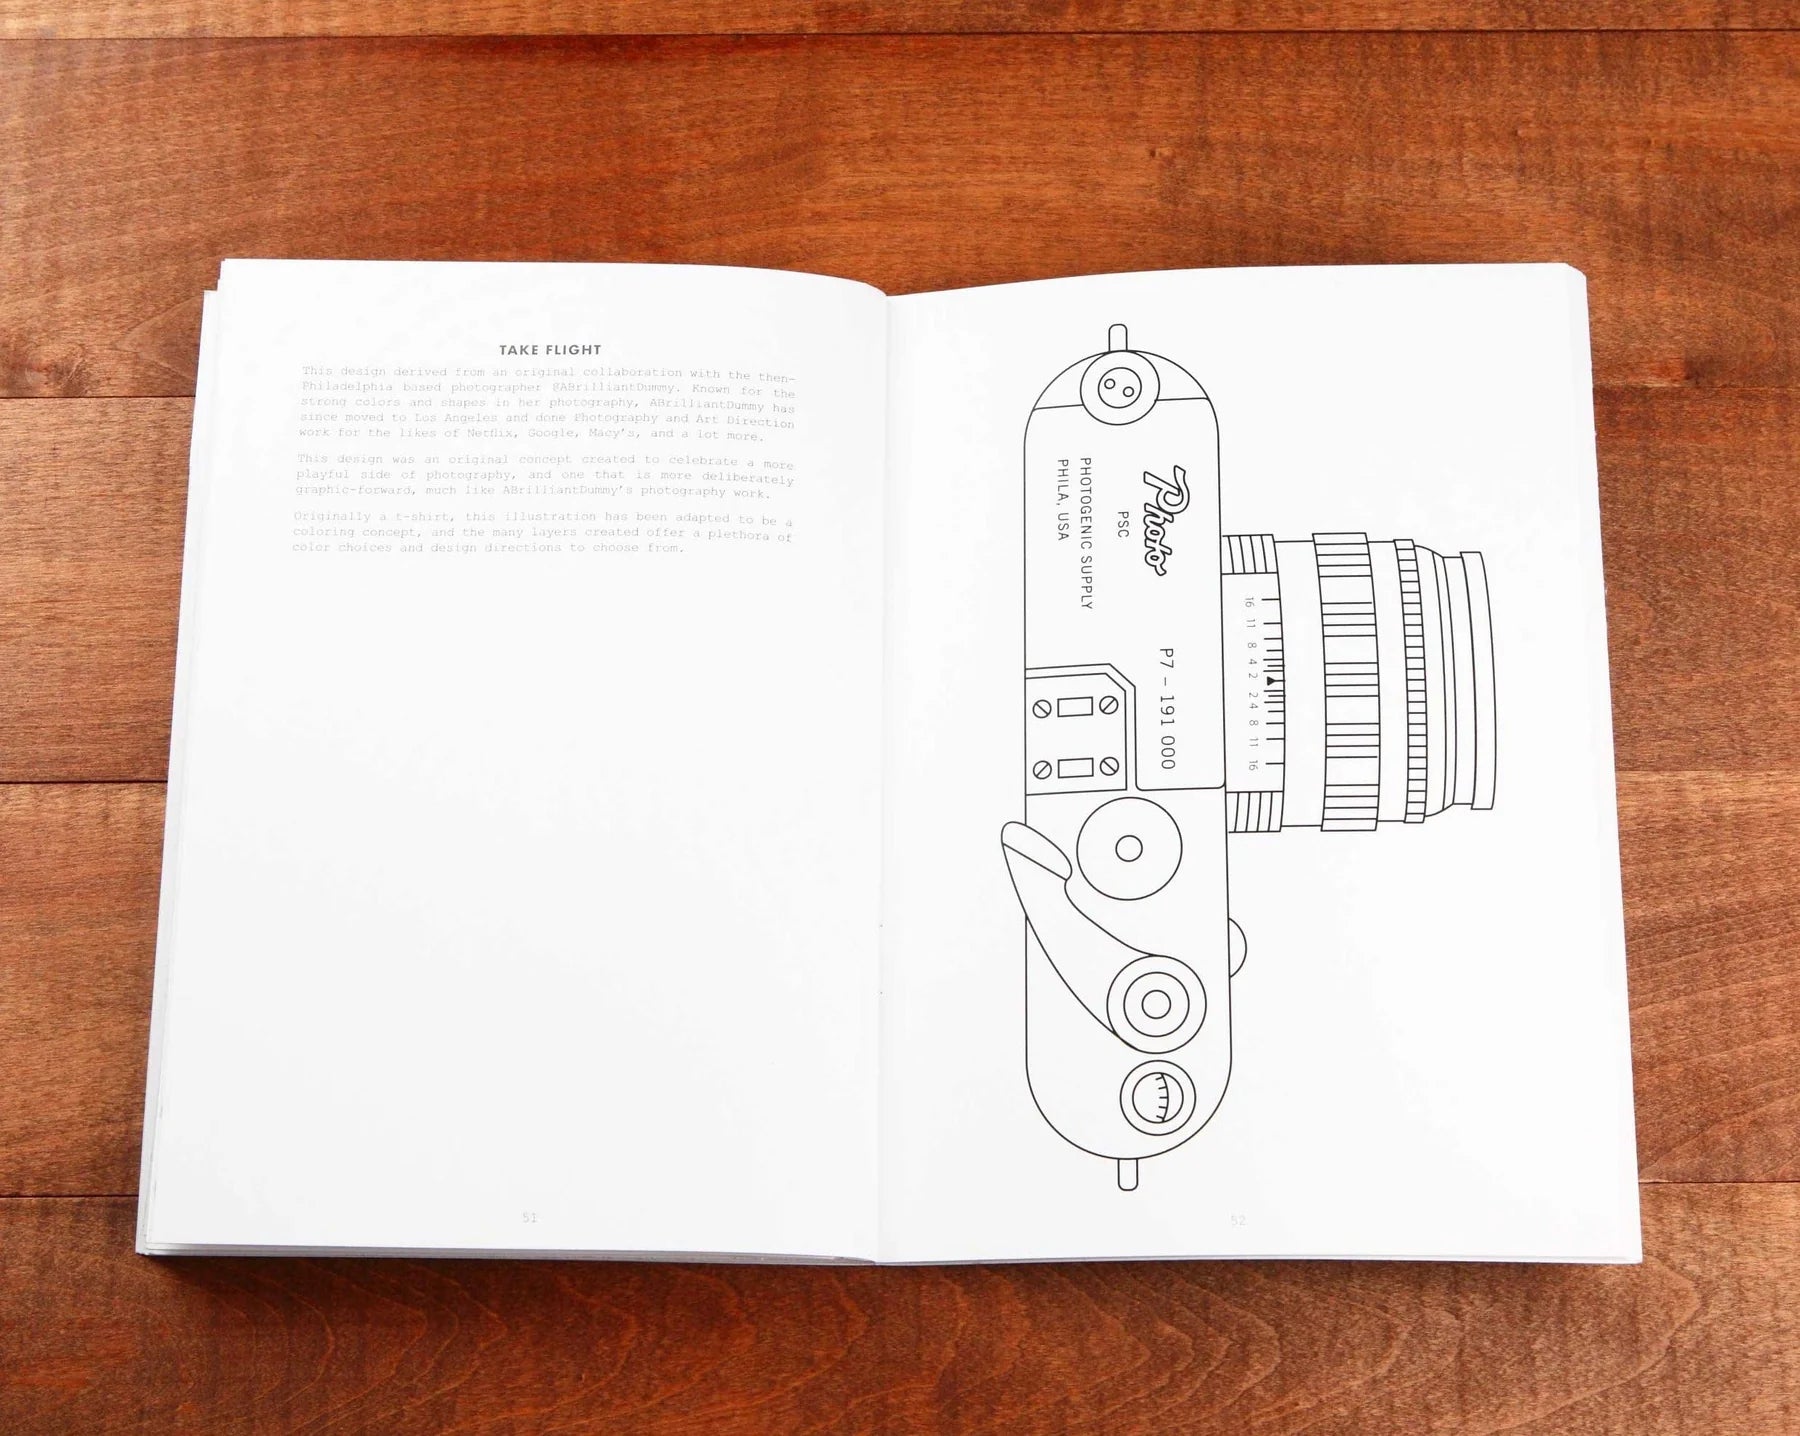 Photogenic Supply Co. Photographer’s Coloring Book - B&C Camera